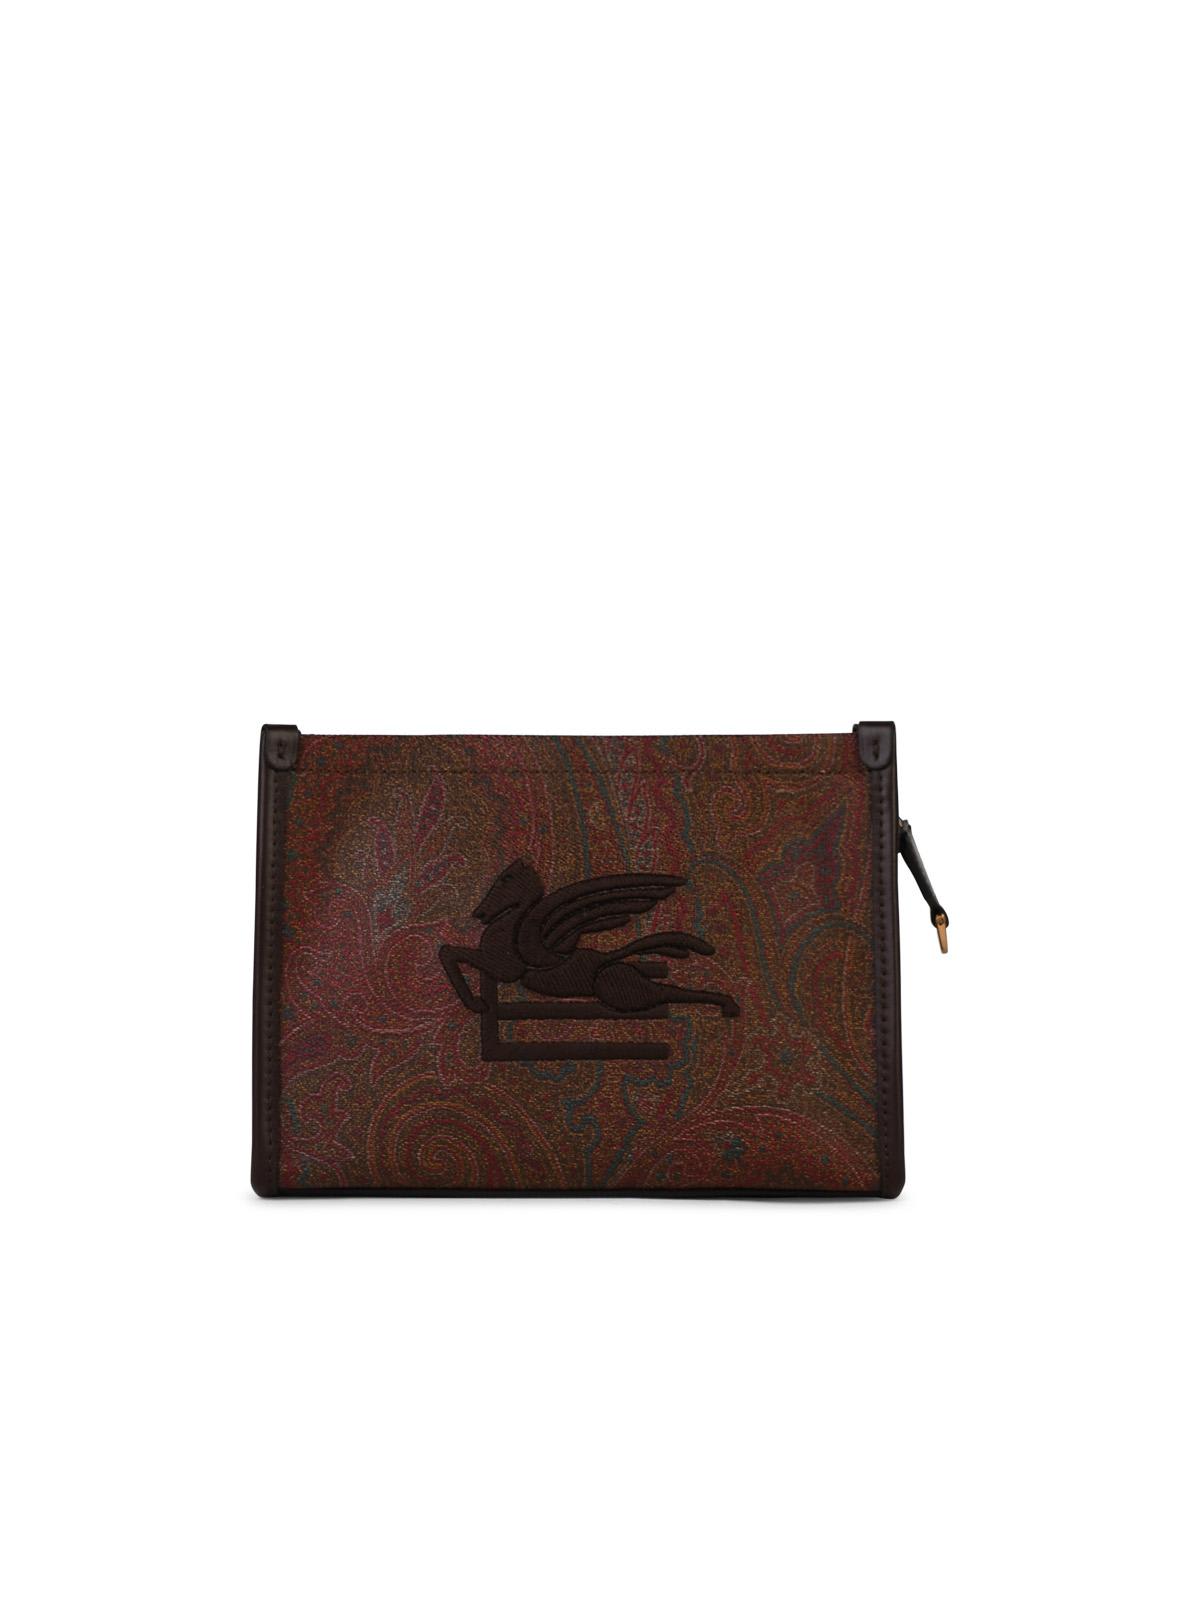 Etro Arnica Brown Leather Clutch Bag